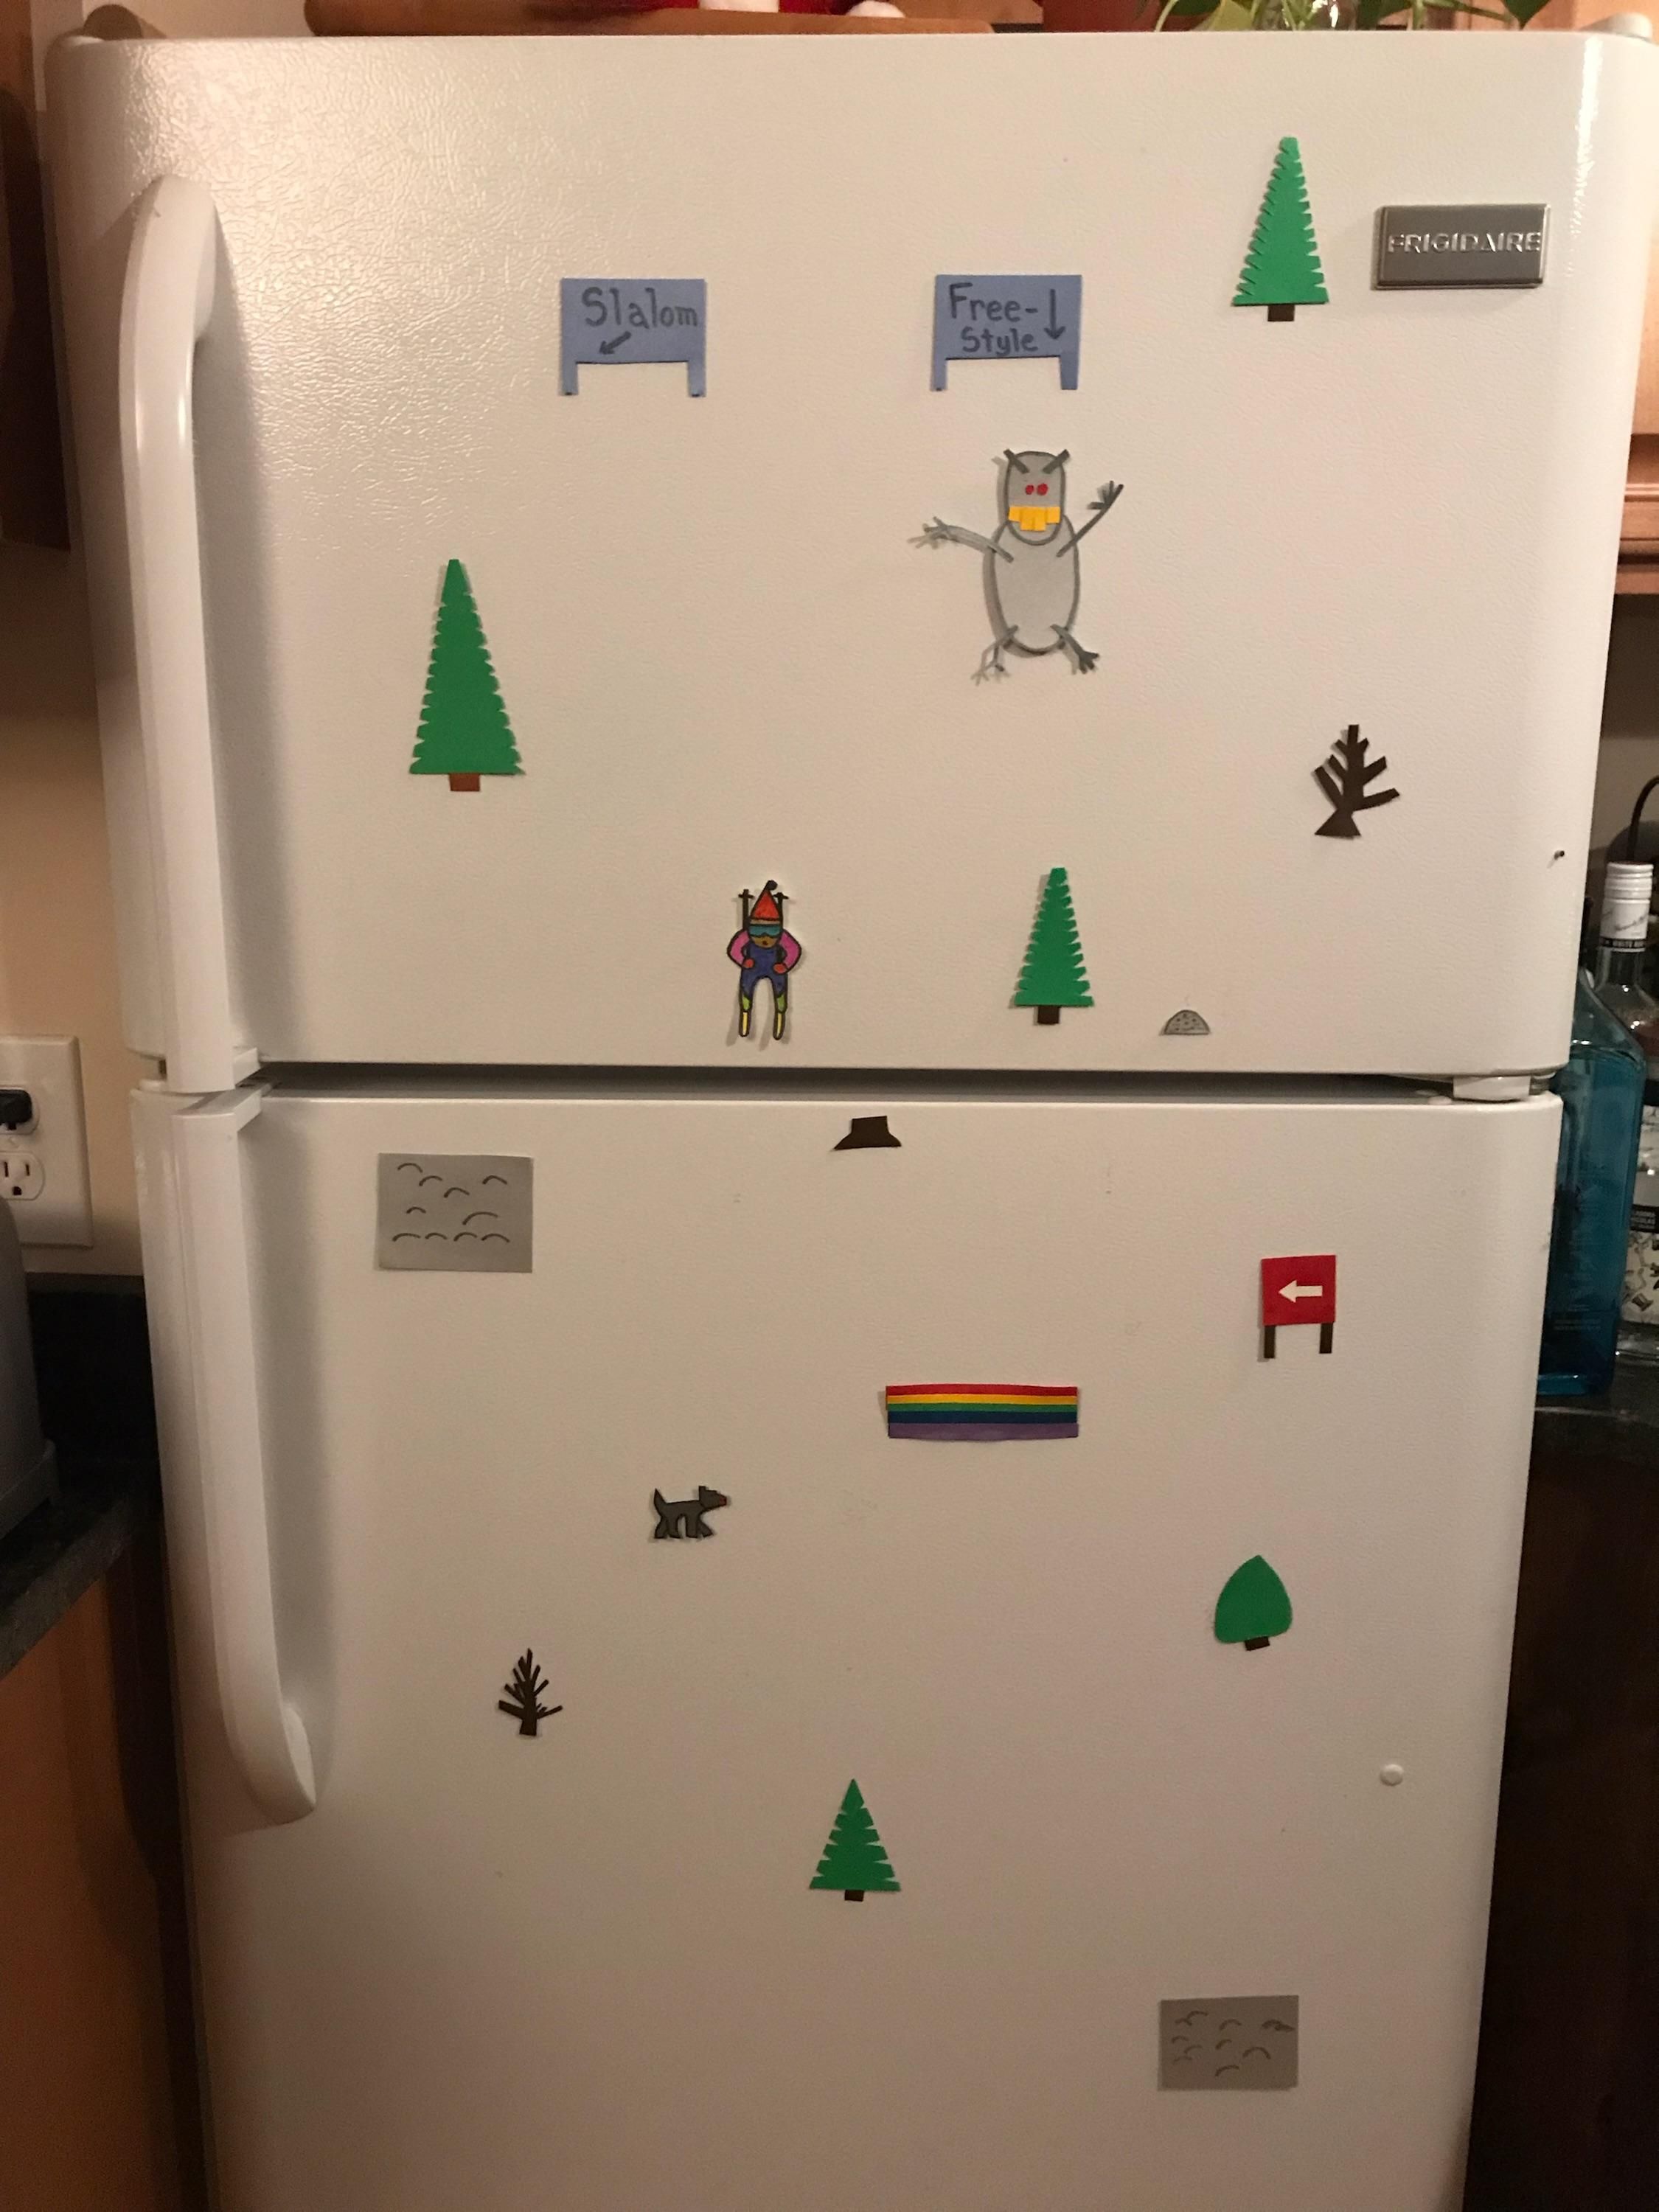 My brother decorated his fridge for the holidays.